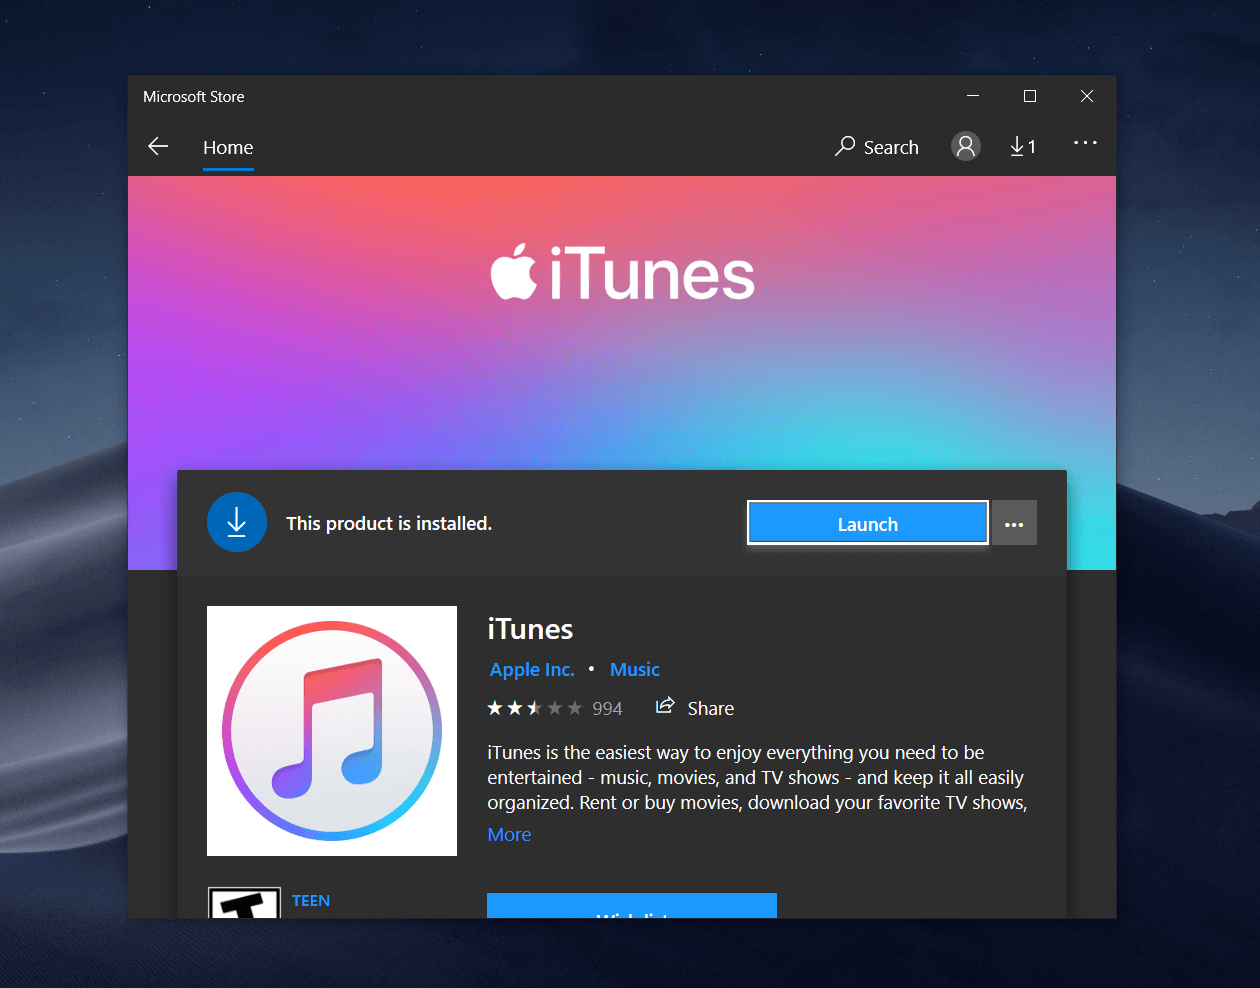 How to set custom ringtone for iPhone using iTunes?